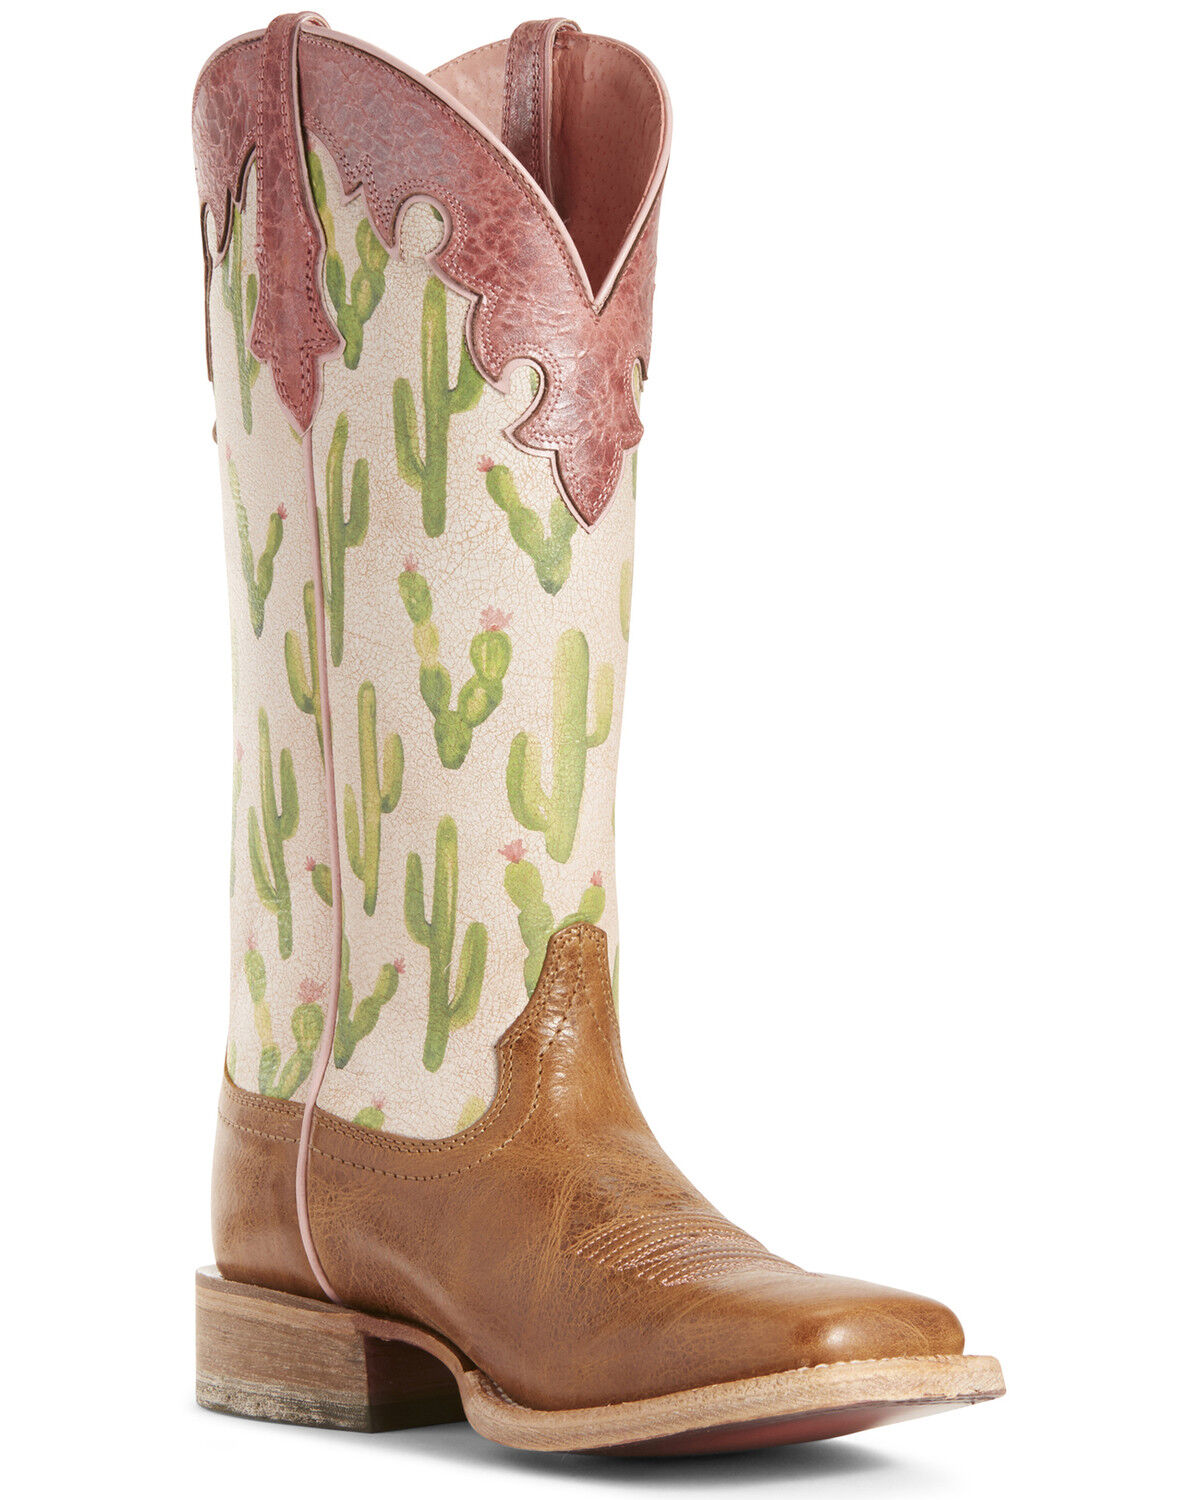 women's country boots sale